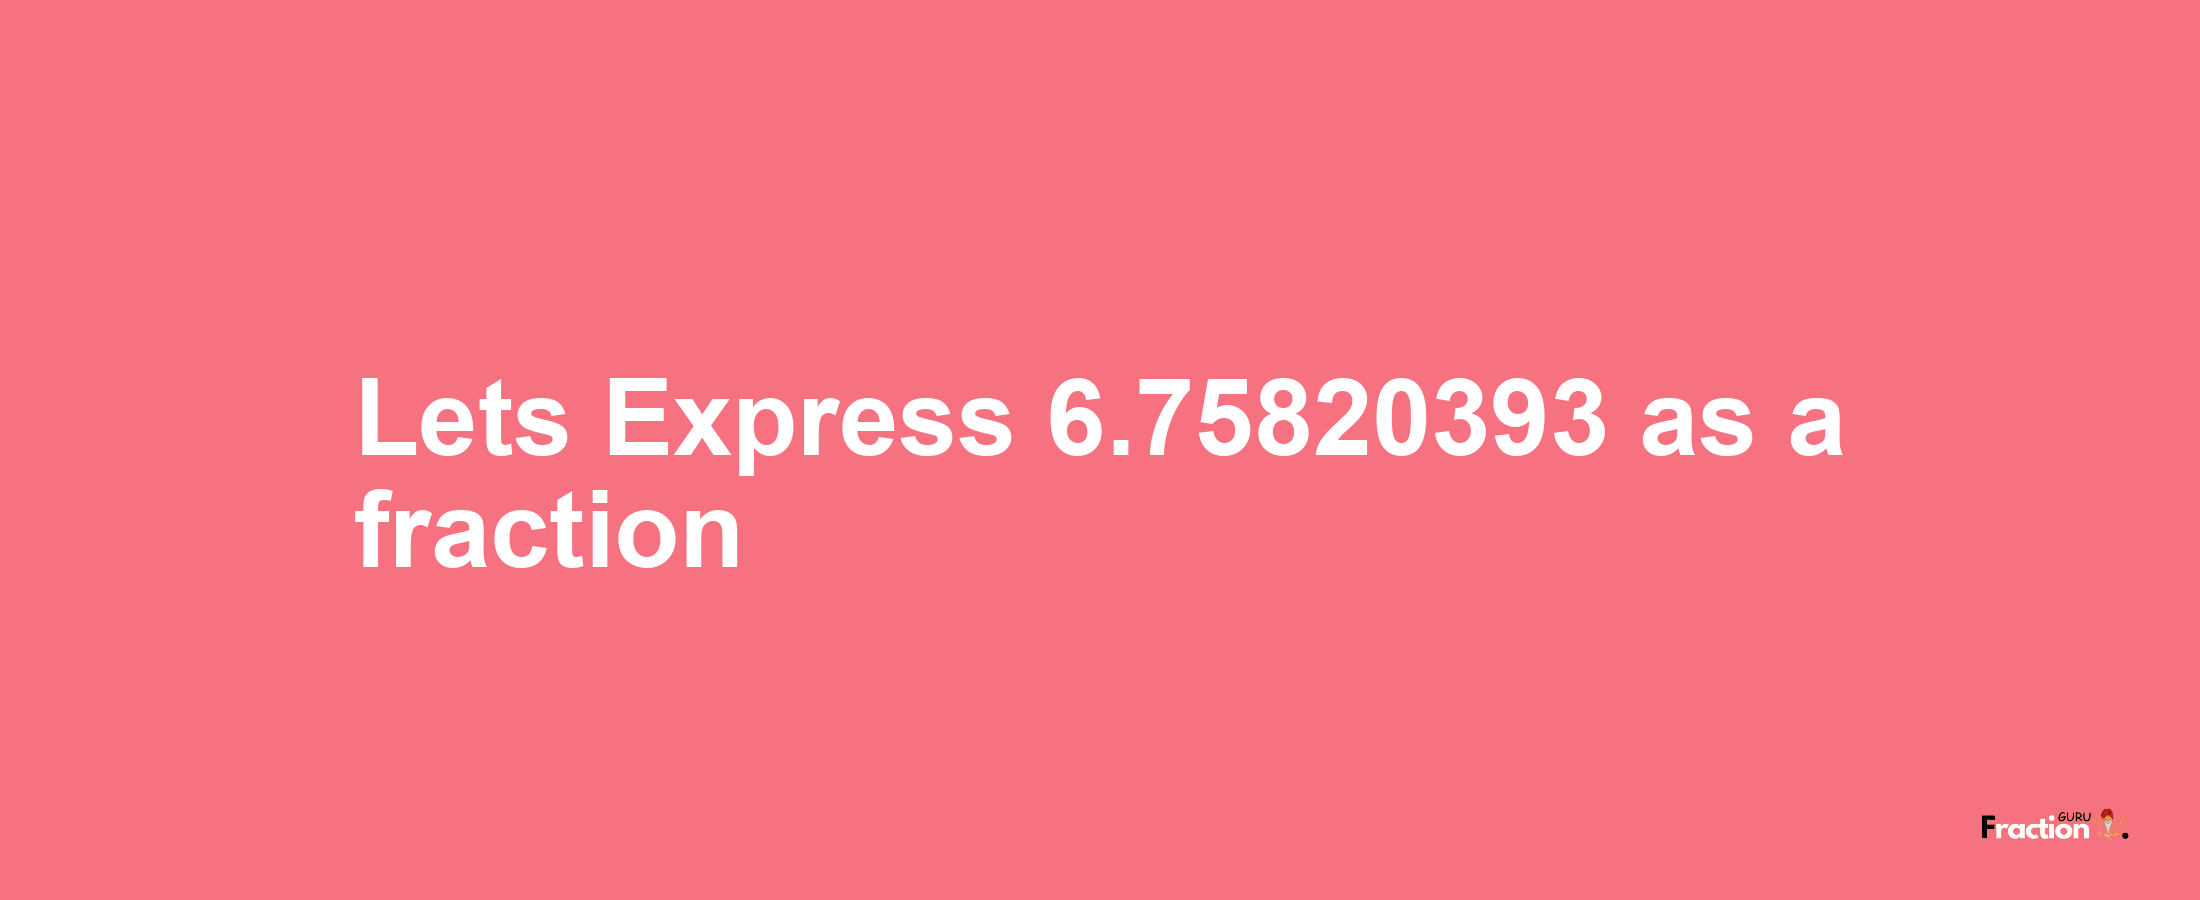 Lets Express 6.75820393 as afraction